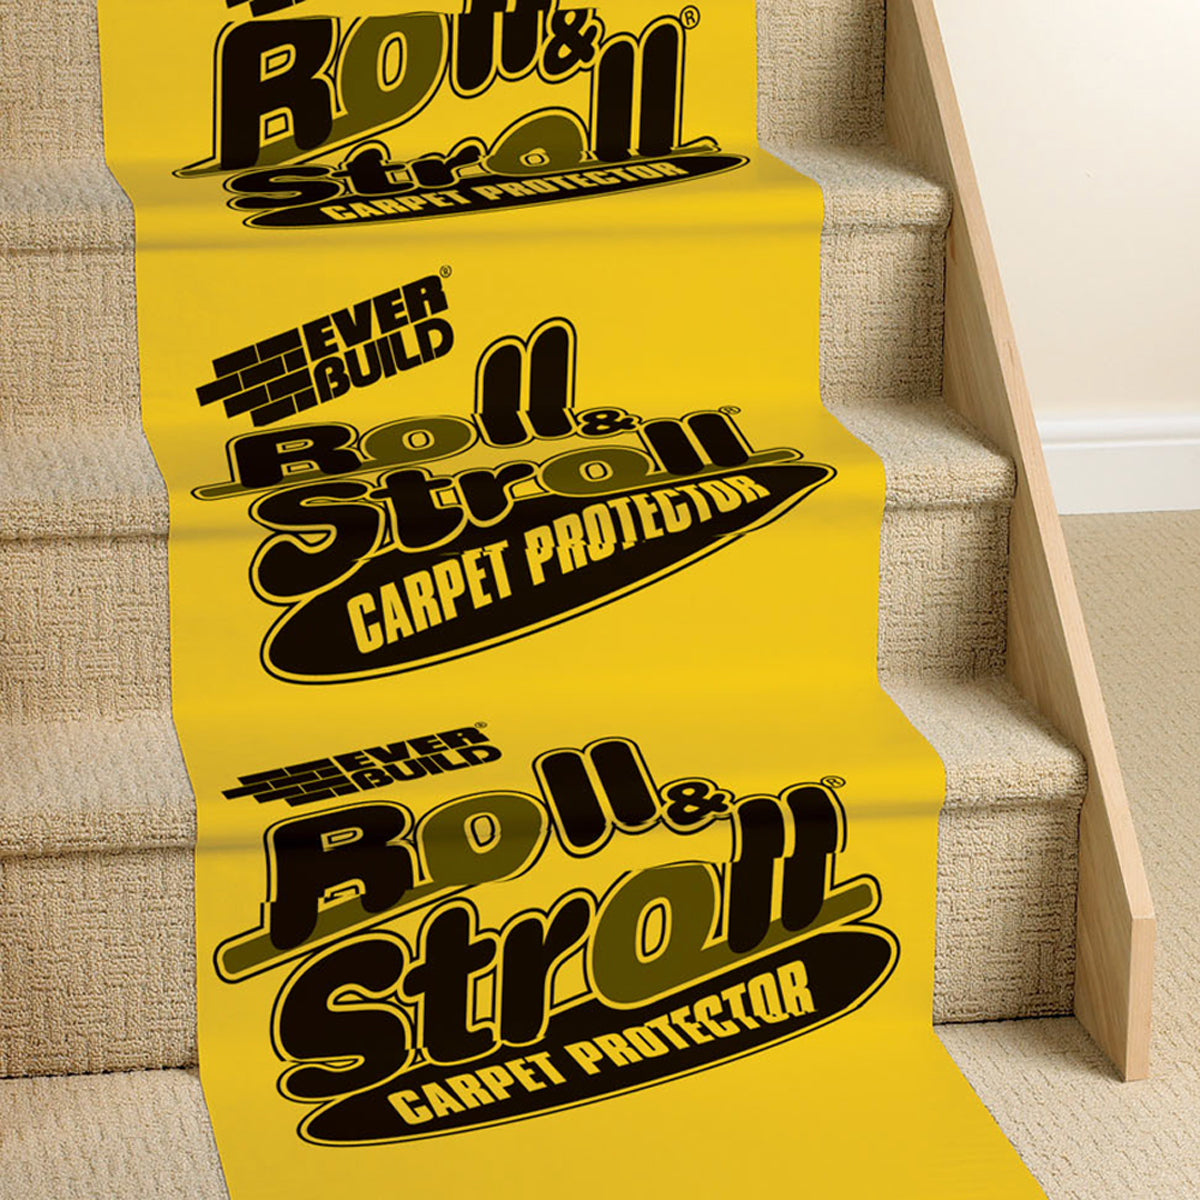 Everbuild Roll & Stroll 600mm x 25m Carpet Floor Protection Film Dust Protector